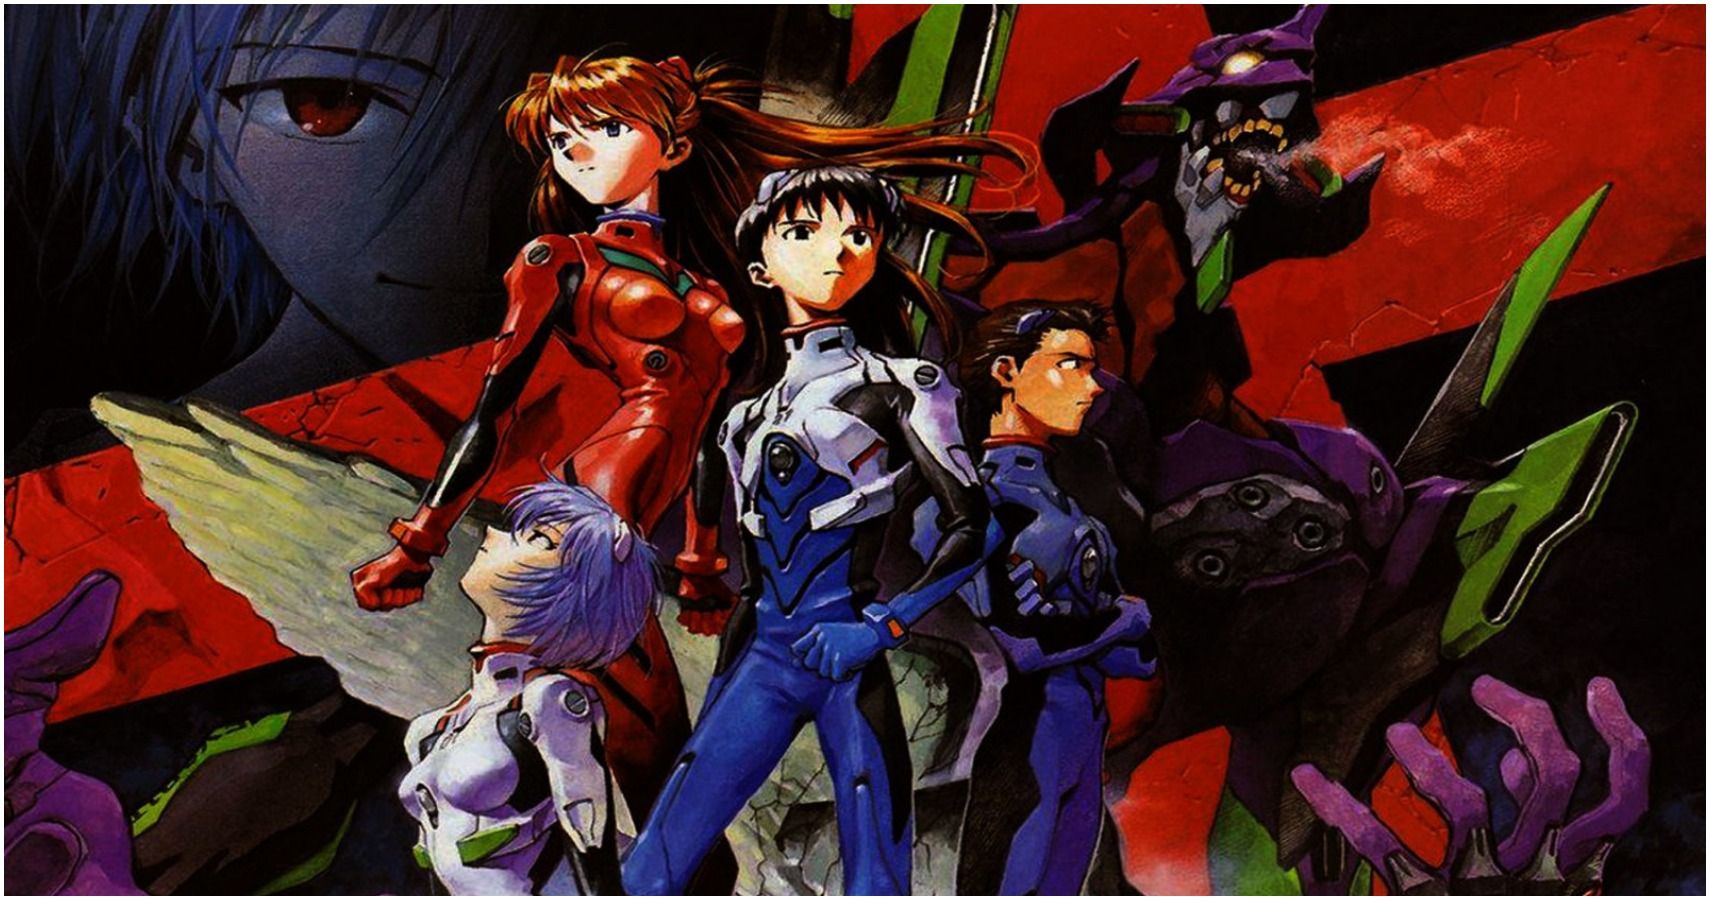 Classic Anime “Neon Genesis Evangelion” to Thrill and Perplex New Audiences  on Netflix | Nippon.com